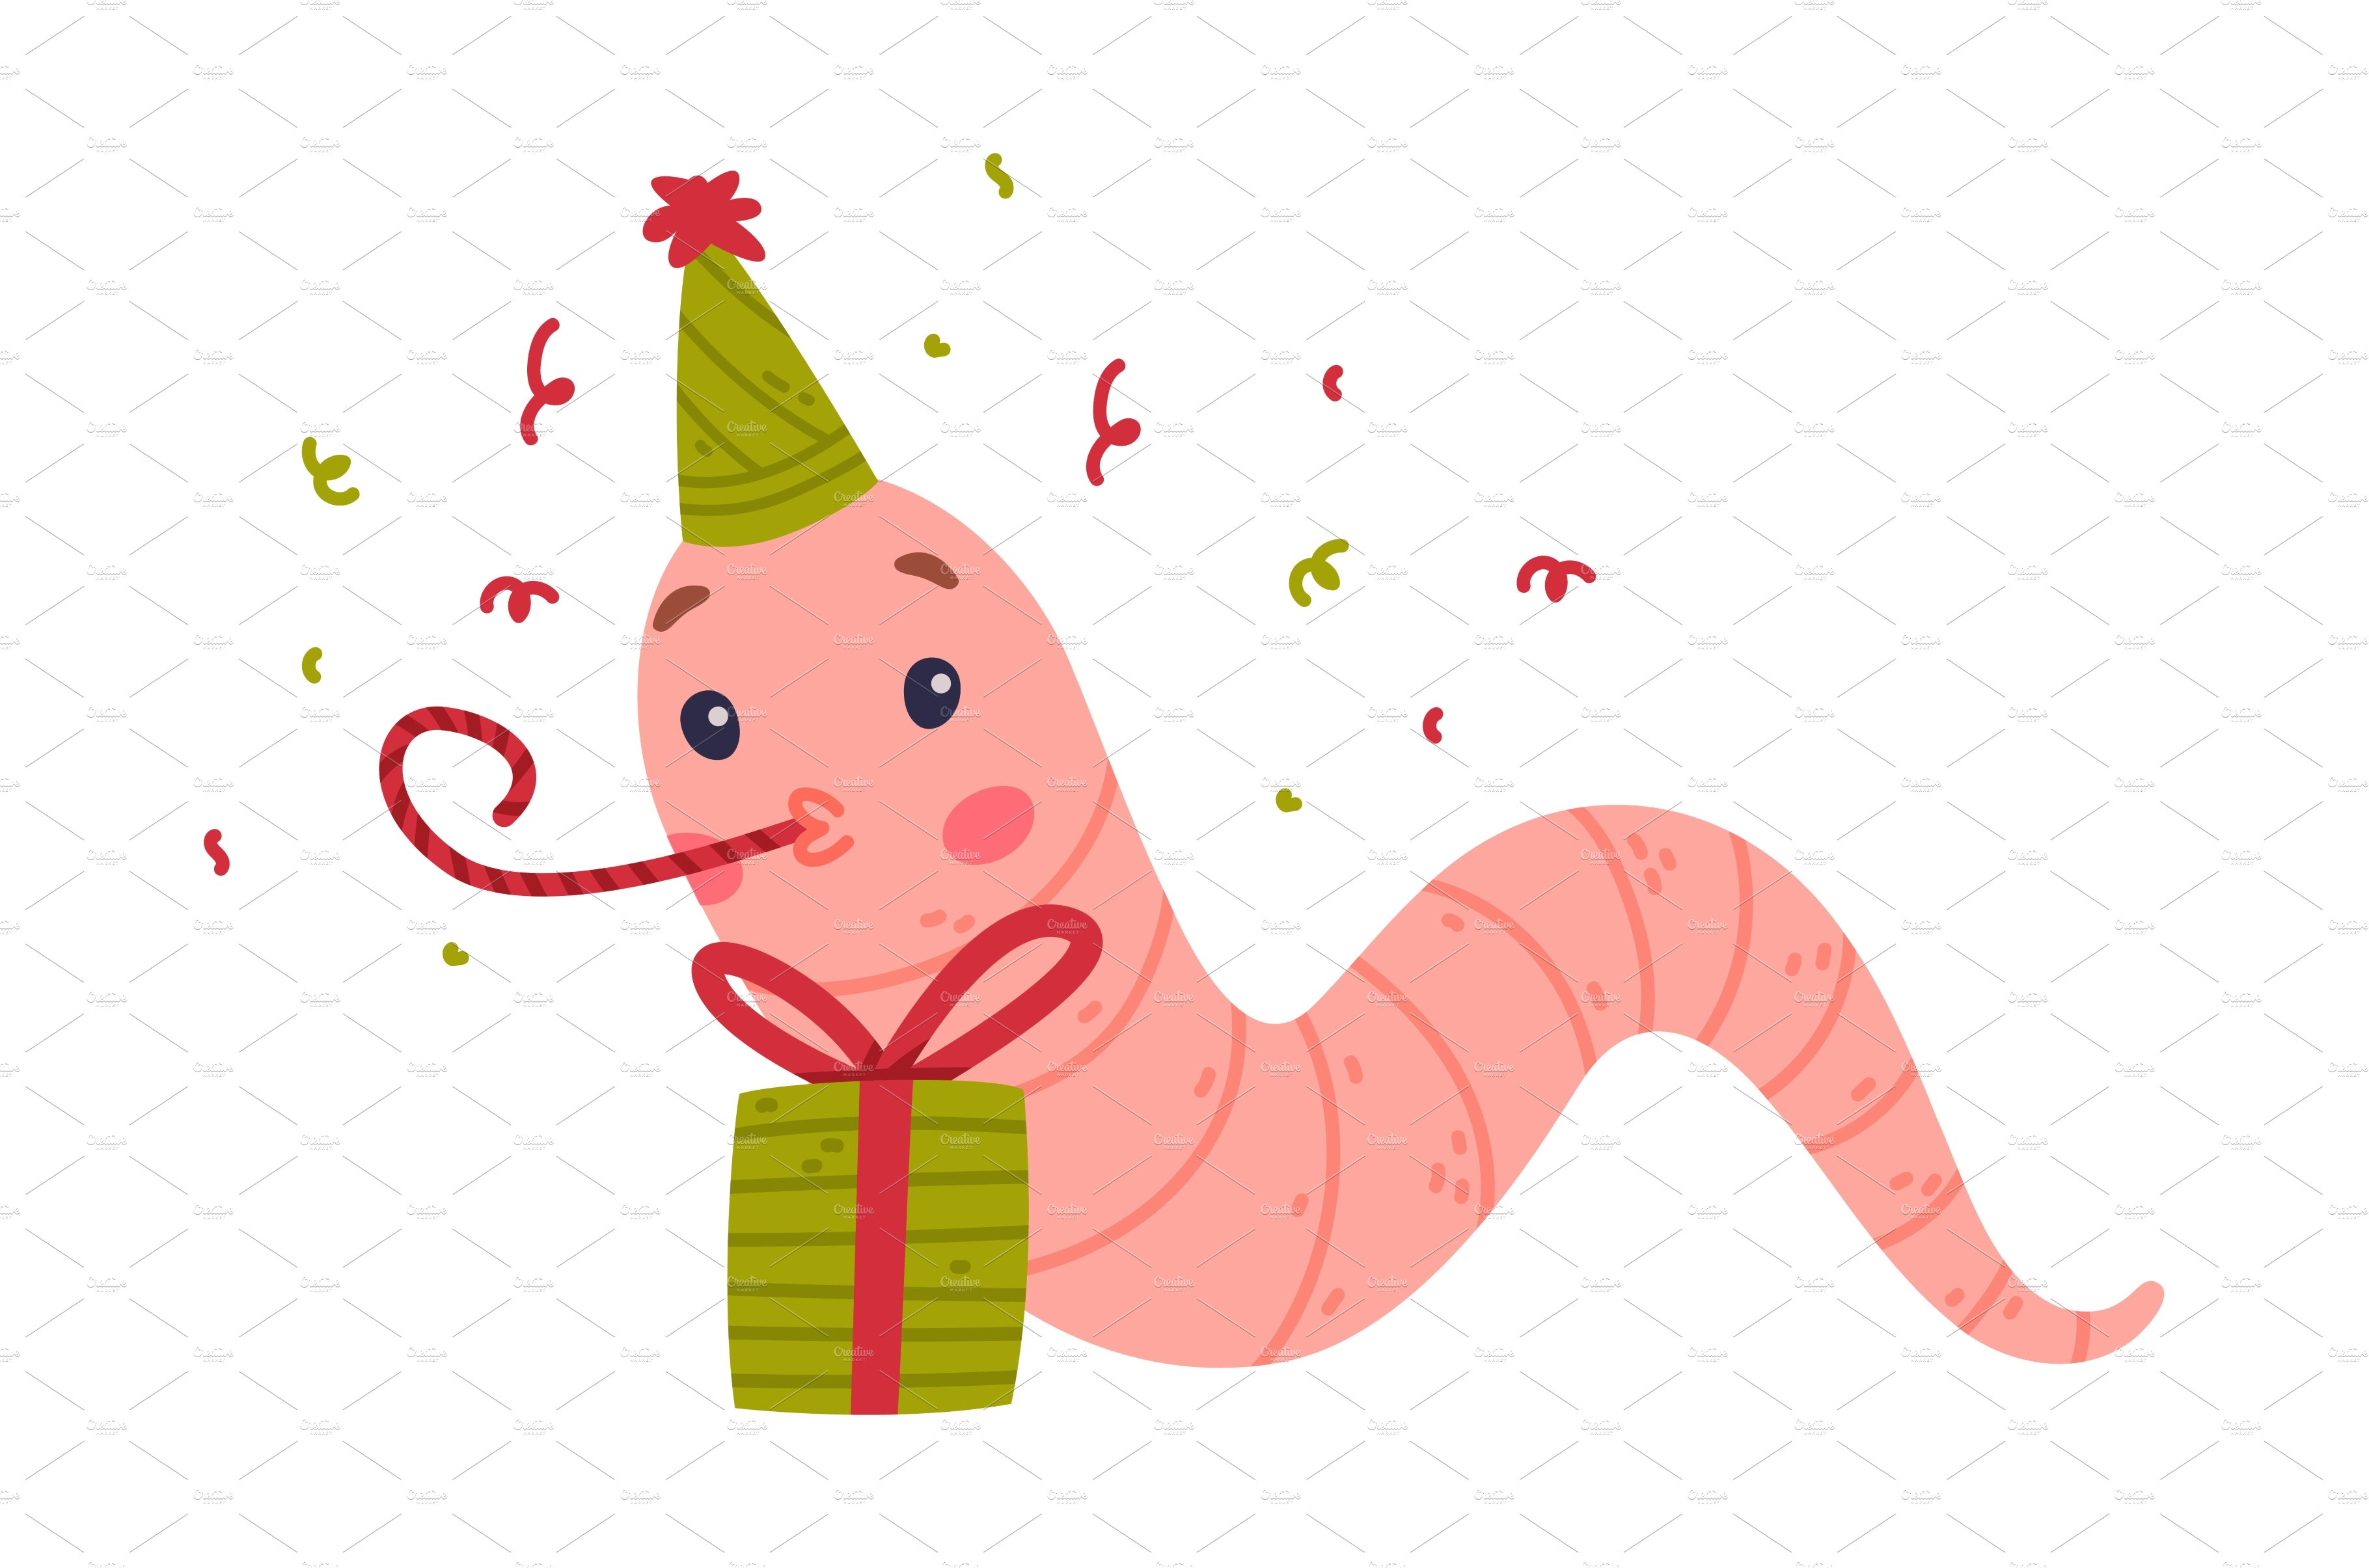 Funny Pink Worm Character in cover image.